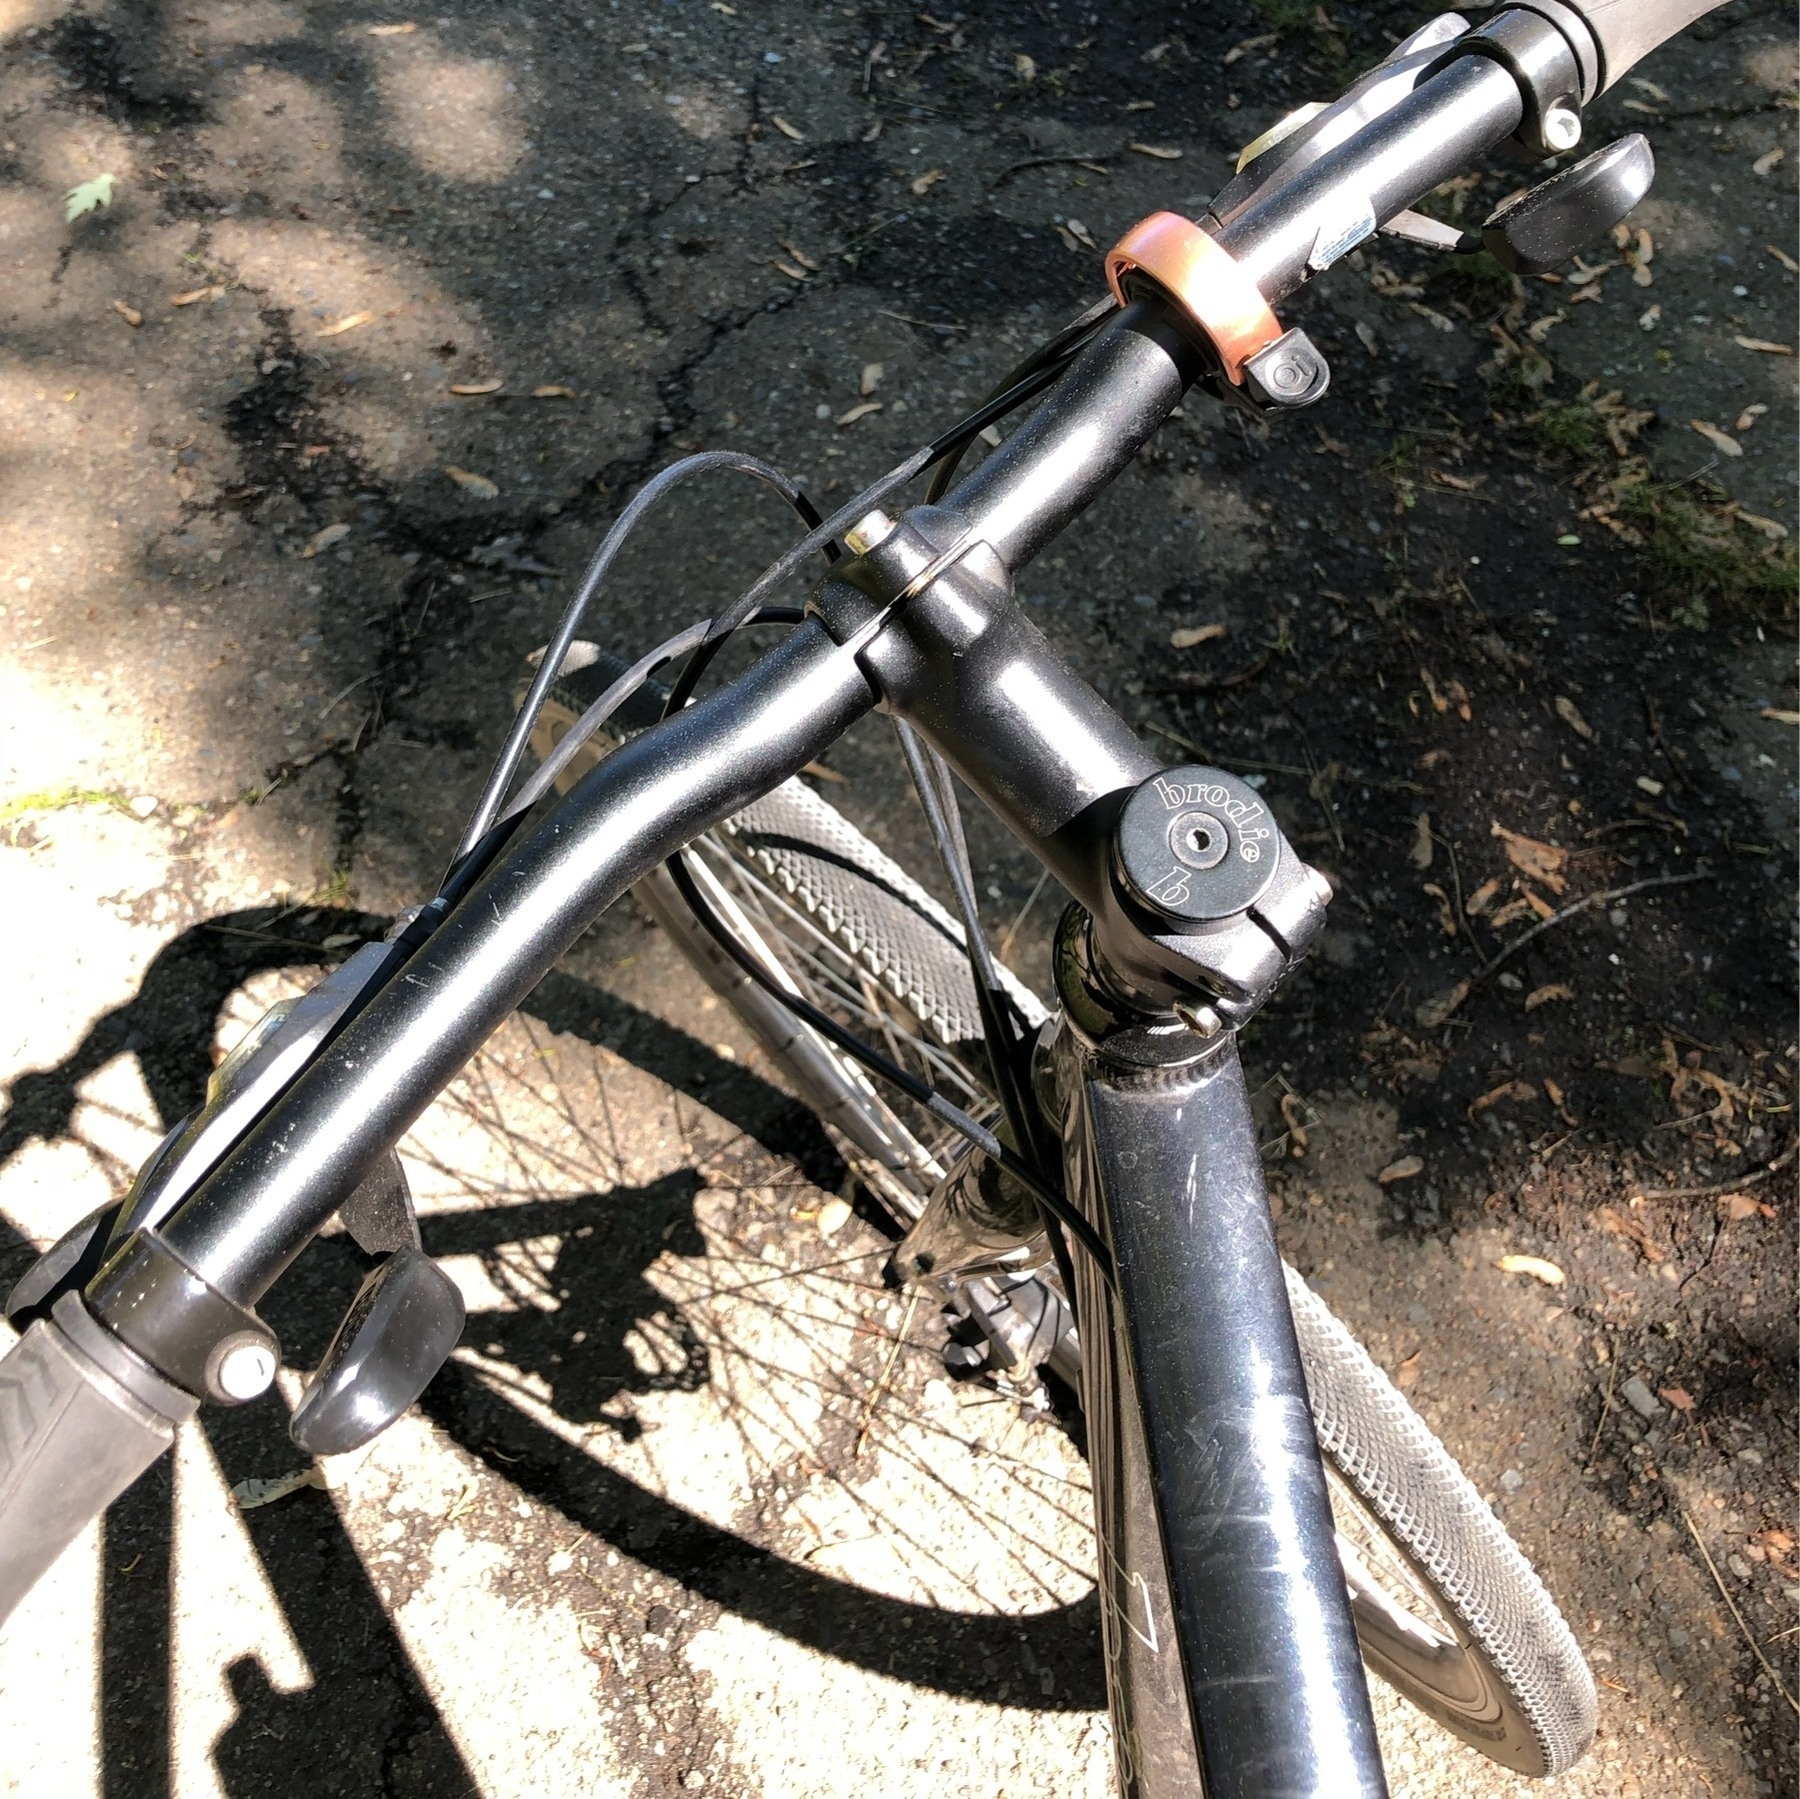 Looking down at mountain bike handlebars and front wheel of bicycle in a driveway.